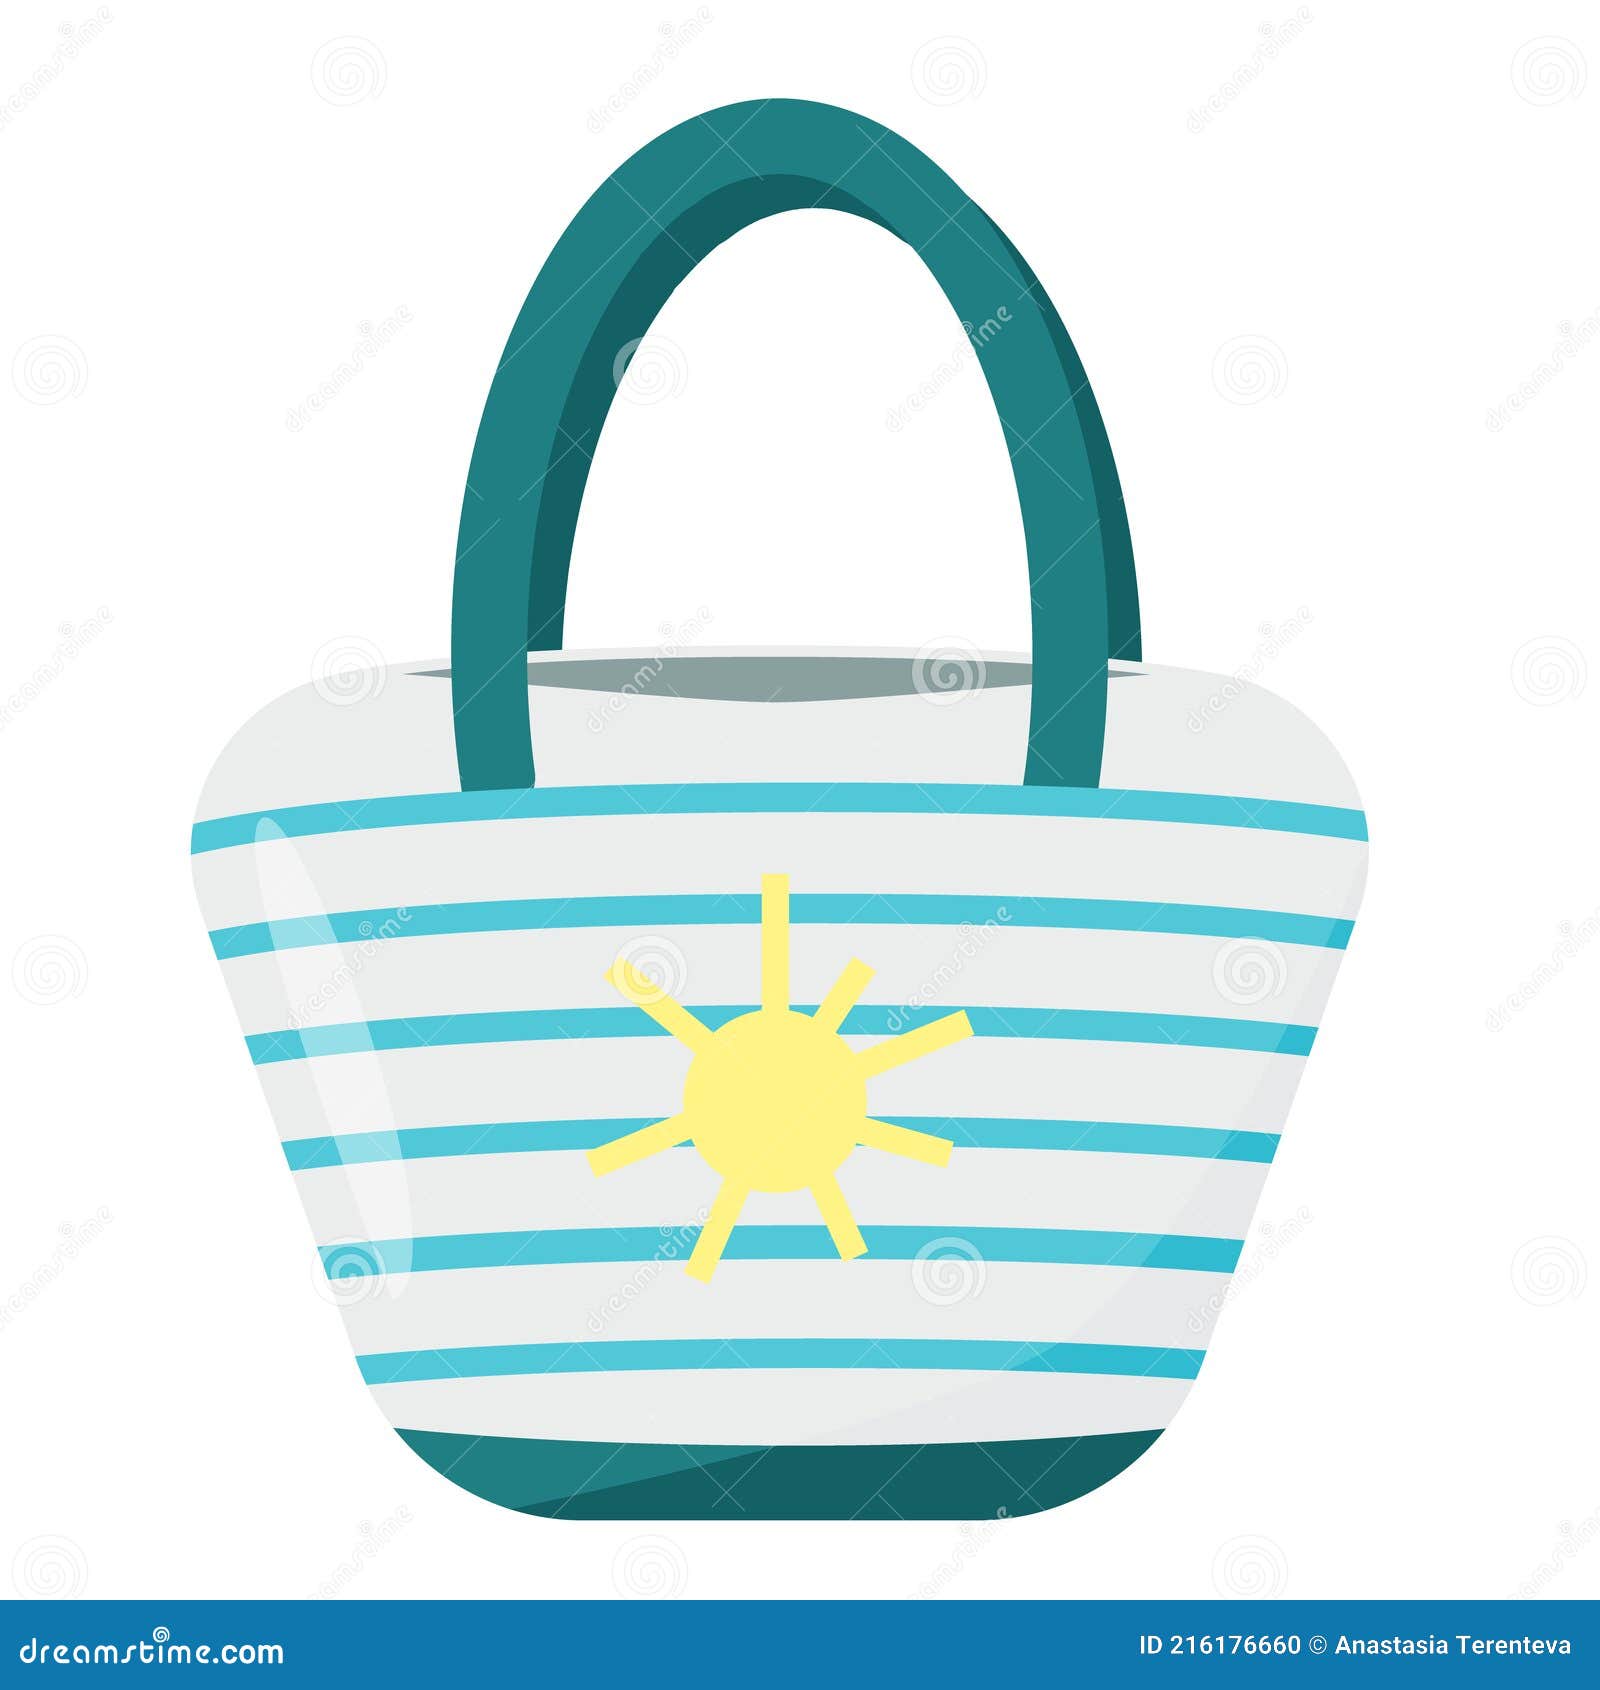 Women S Beach Bag. Isolated on a White Background Stock Vector ...